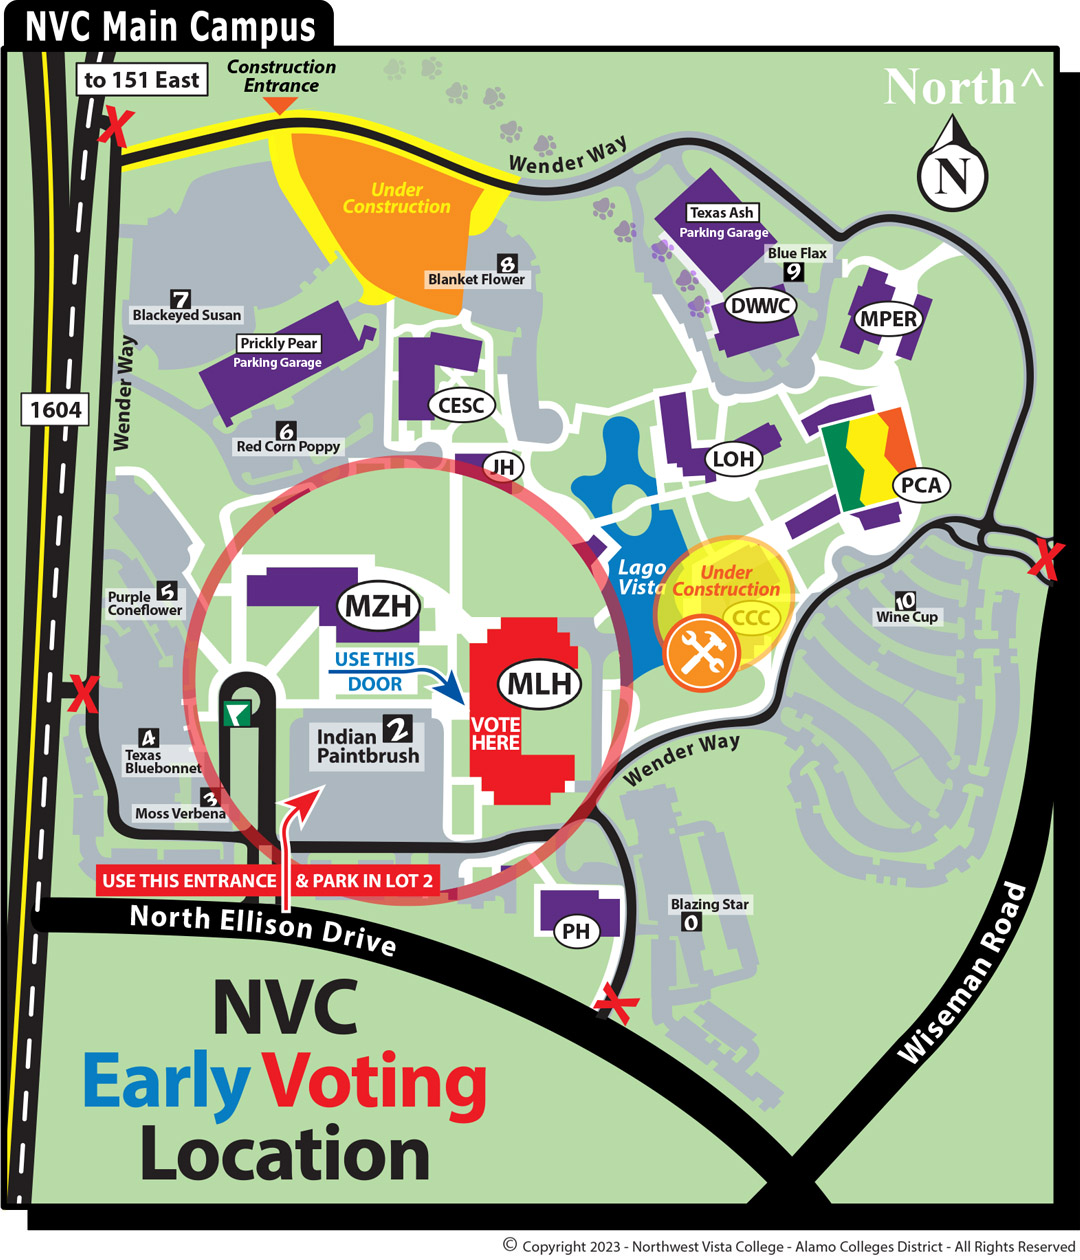 Voting Location - MLH 101 A&B